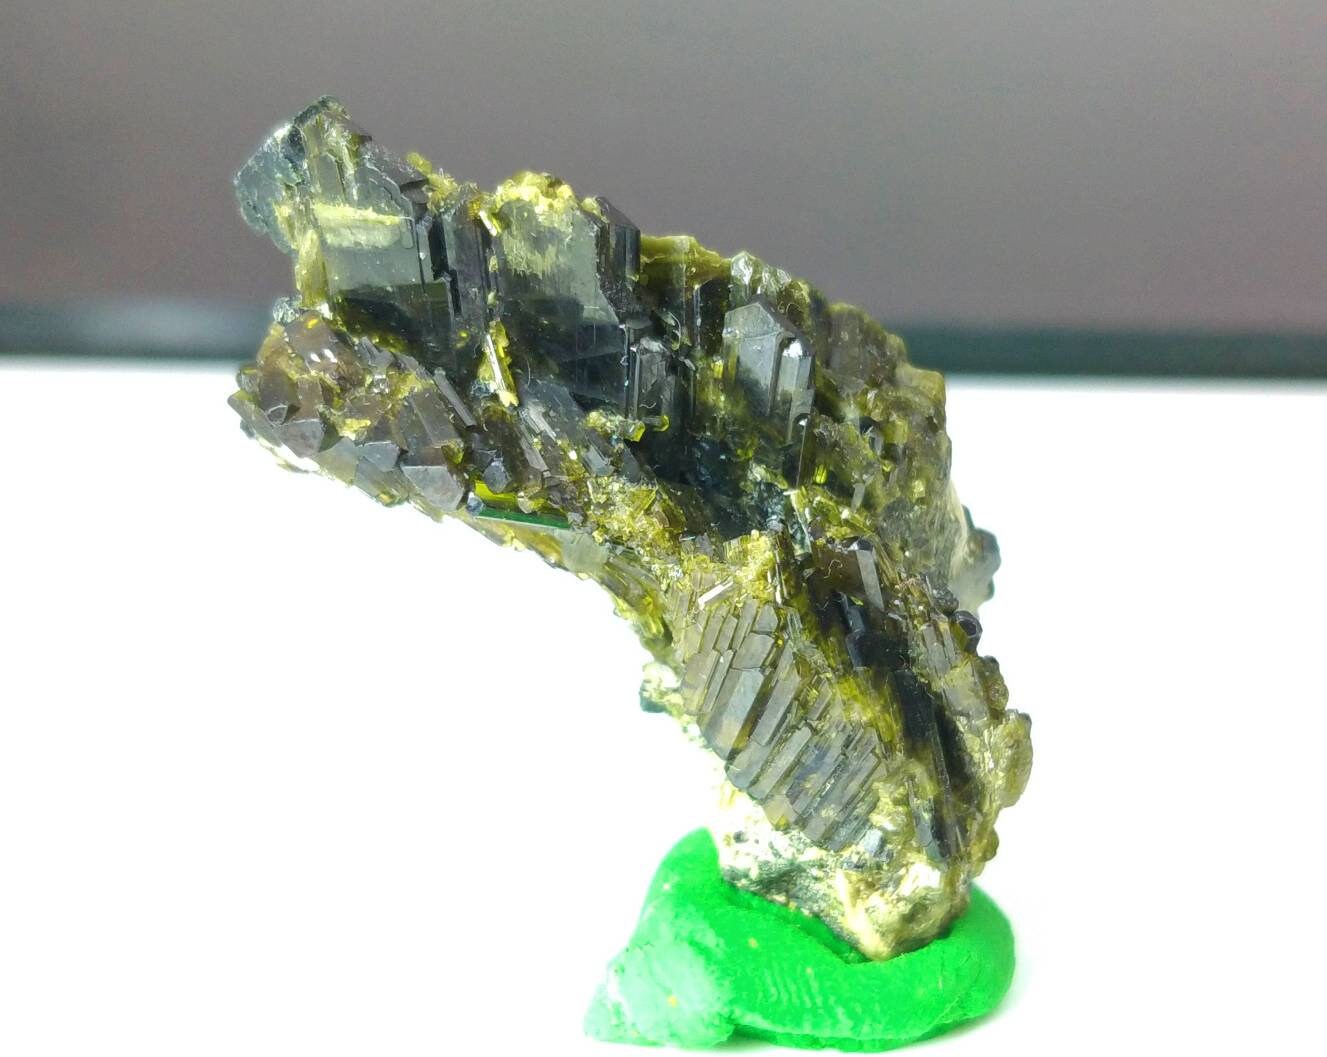 ARSAA GEMS AND MINERALSNatural aesthetic step formation perfectly terminated ugaite/aegirine with green epidote crystal from Pakistan, weight: 15.8 grams - Premium  from ARSAA GEMS AND MINERALS - Just $30.00! Shop now at ARSAA GEMS AND MINERALS